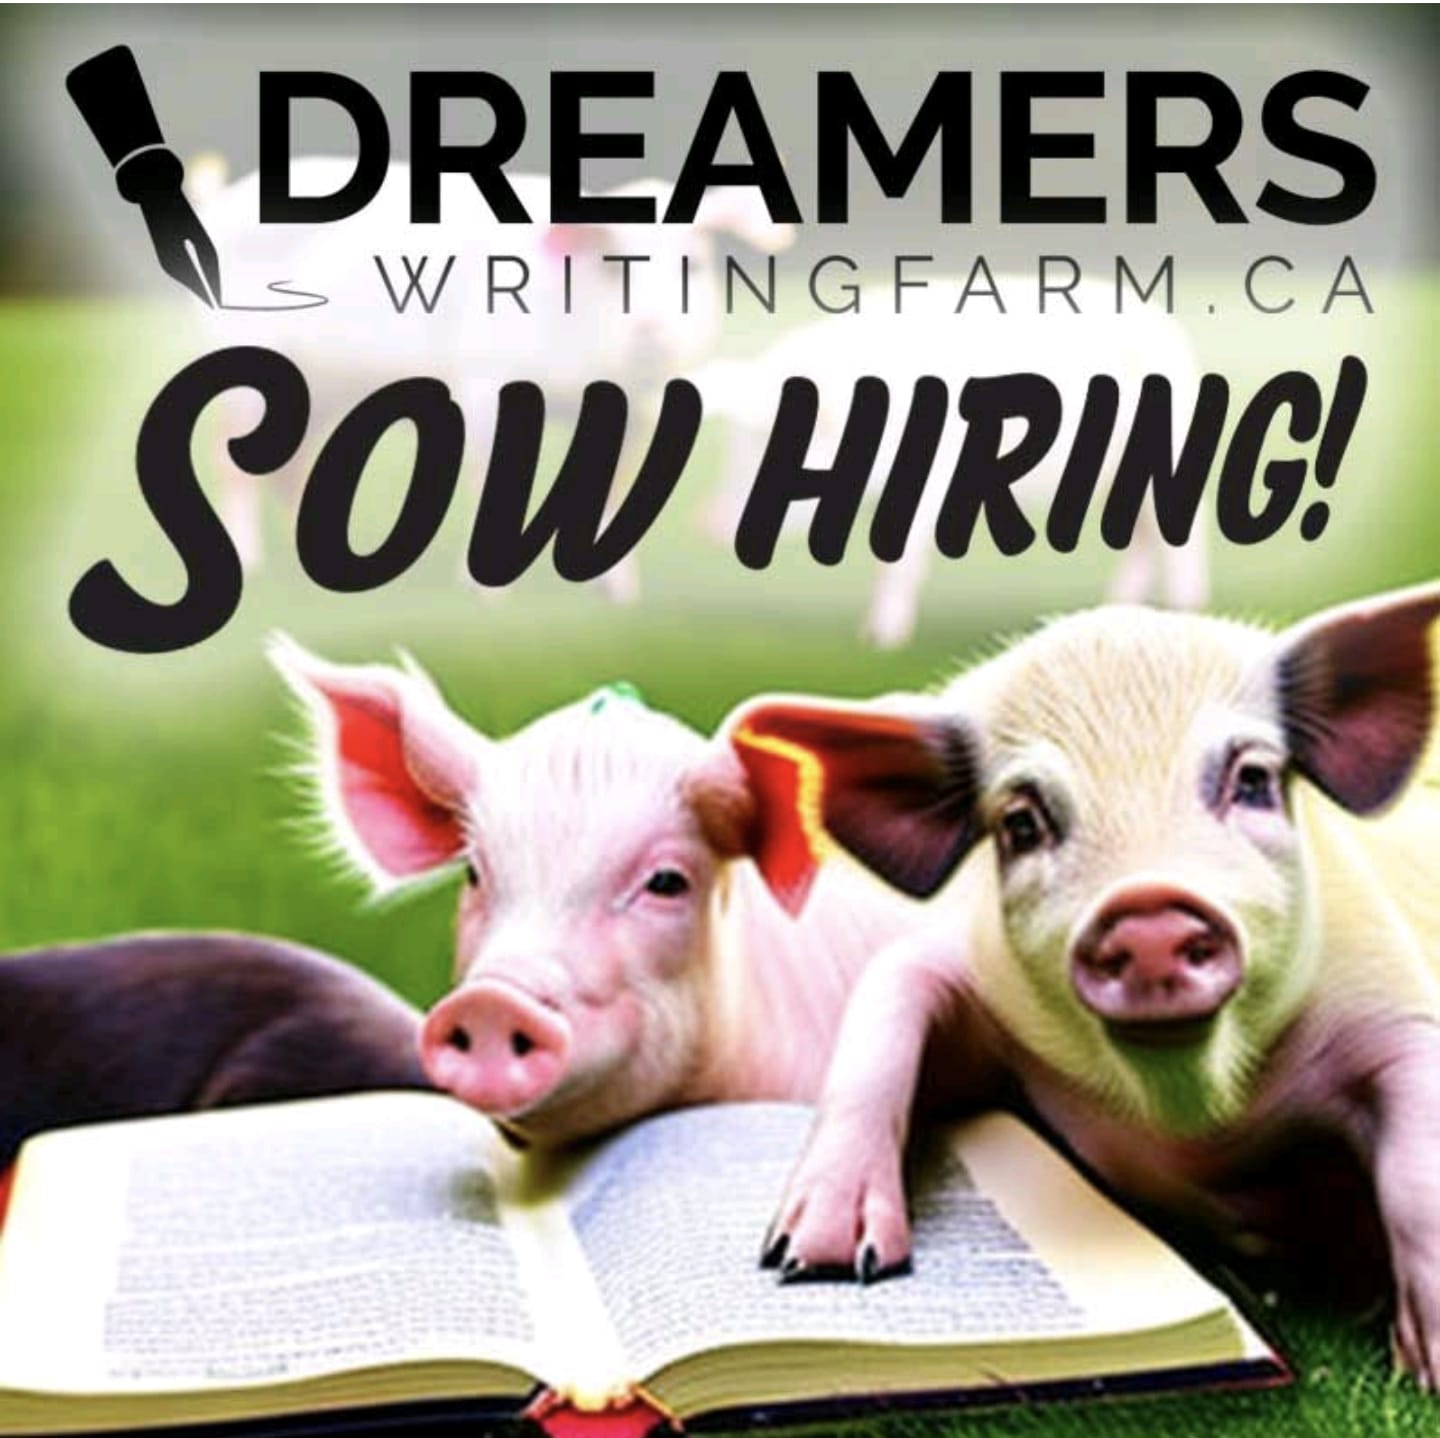 A picture of 2 pigs holding a book with "sow hiring!" written on it to show the job postings at the Dreamers Writing Farm.